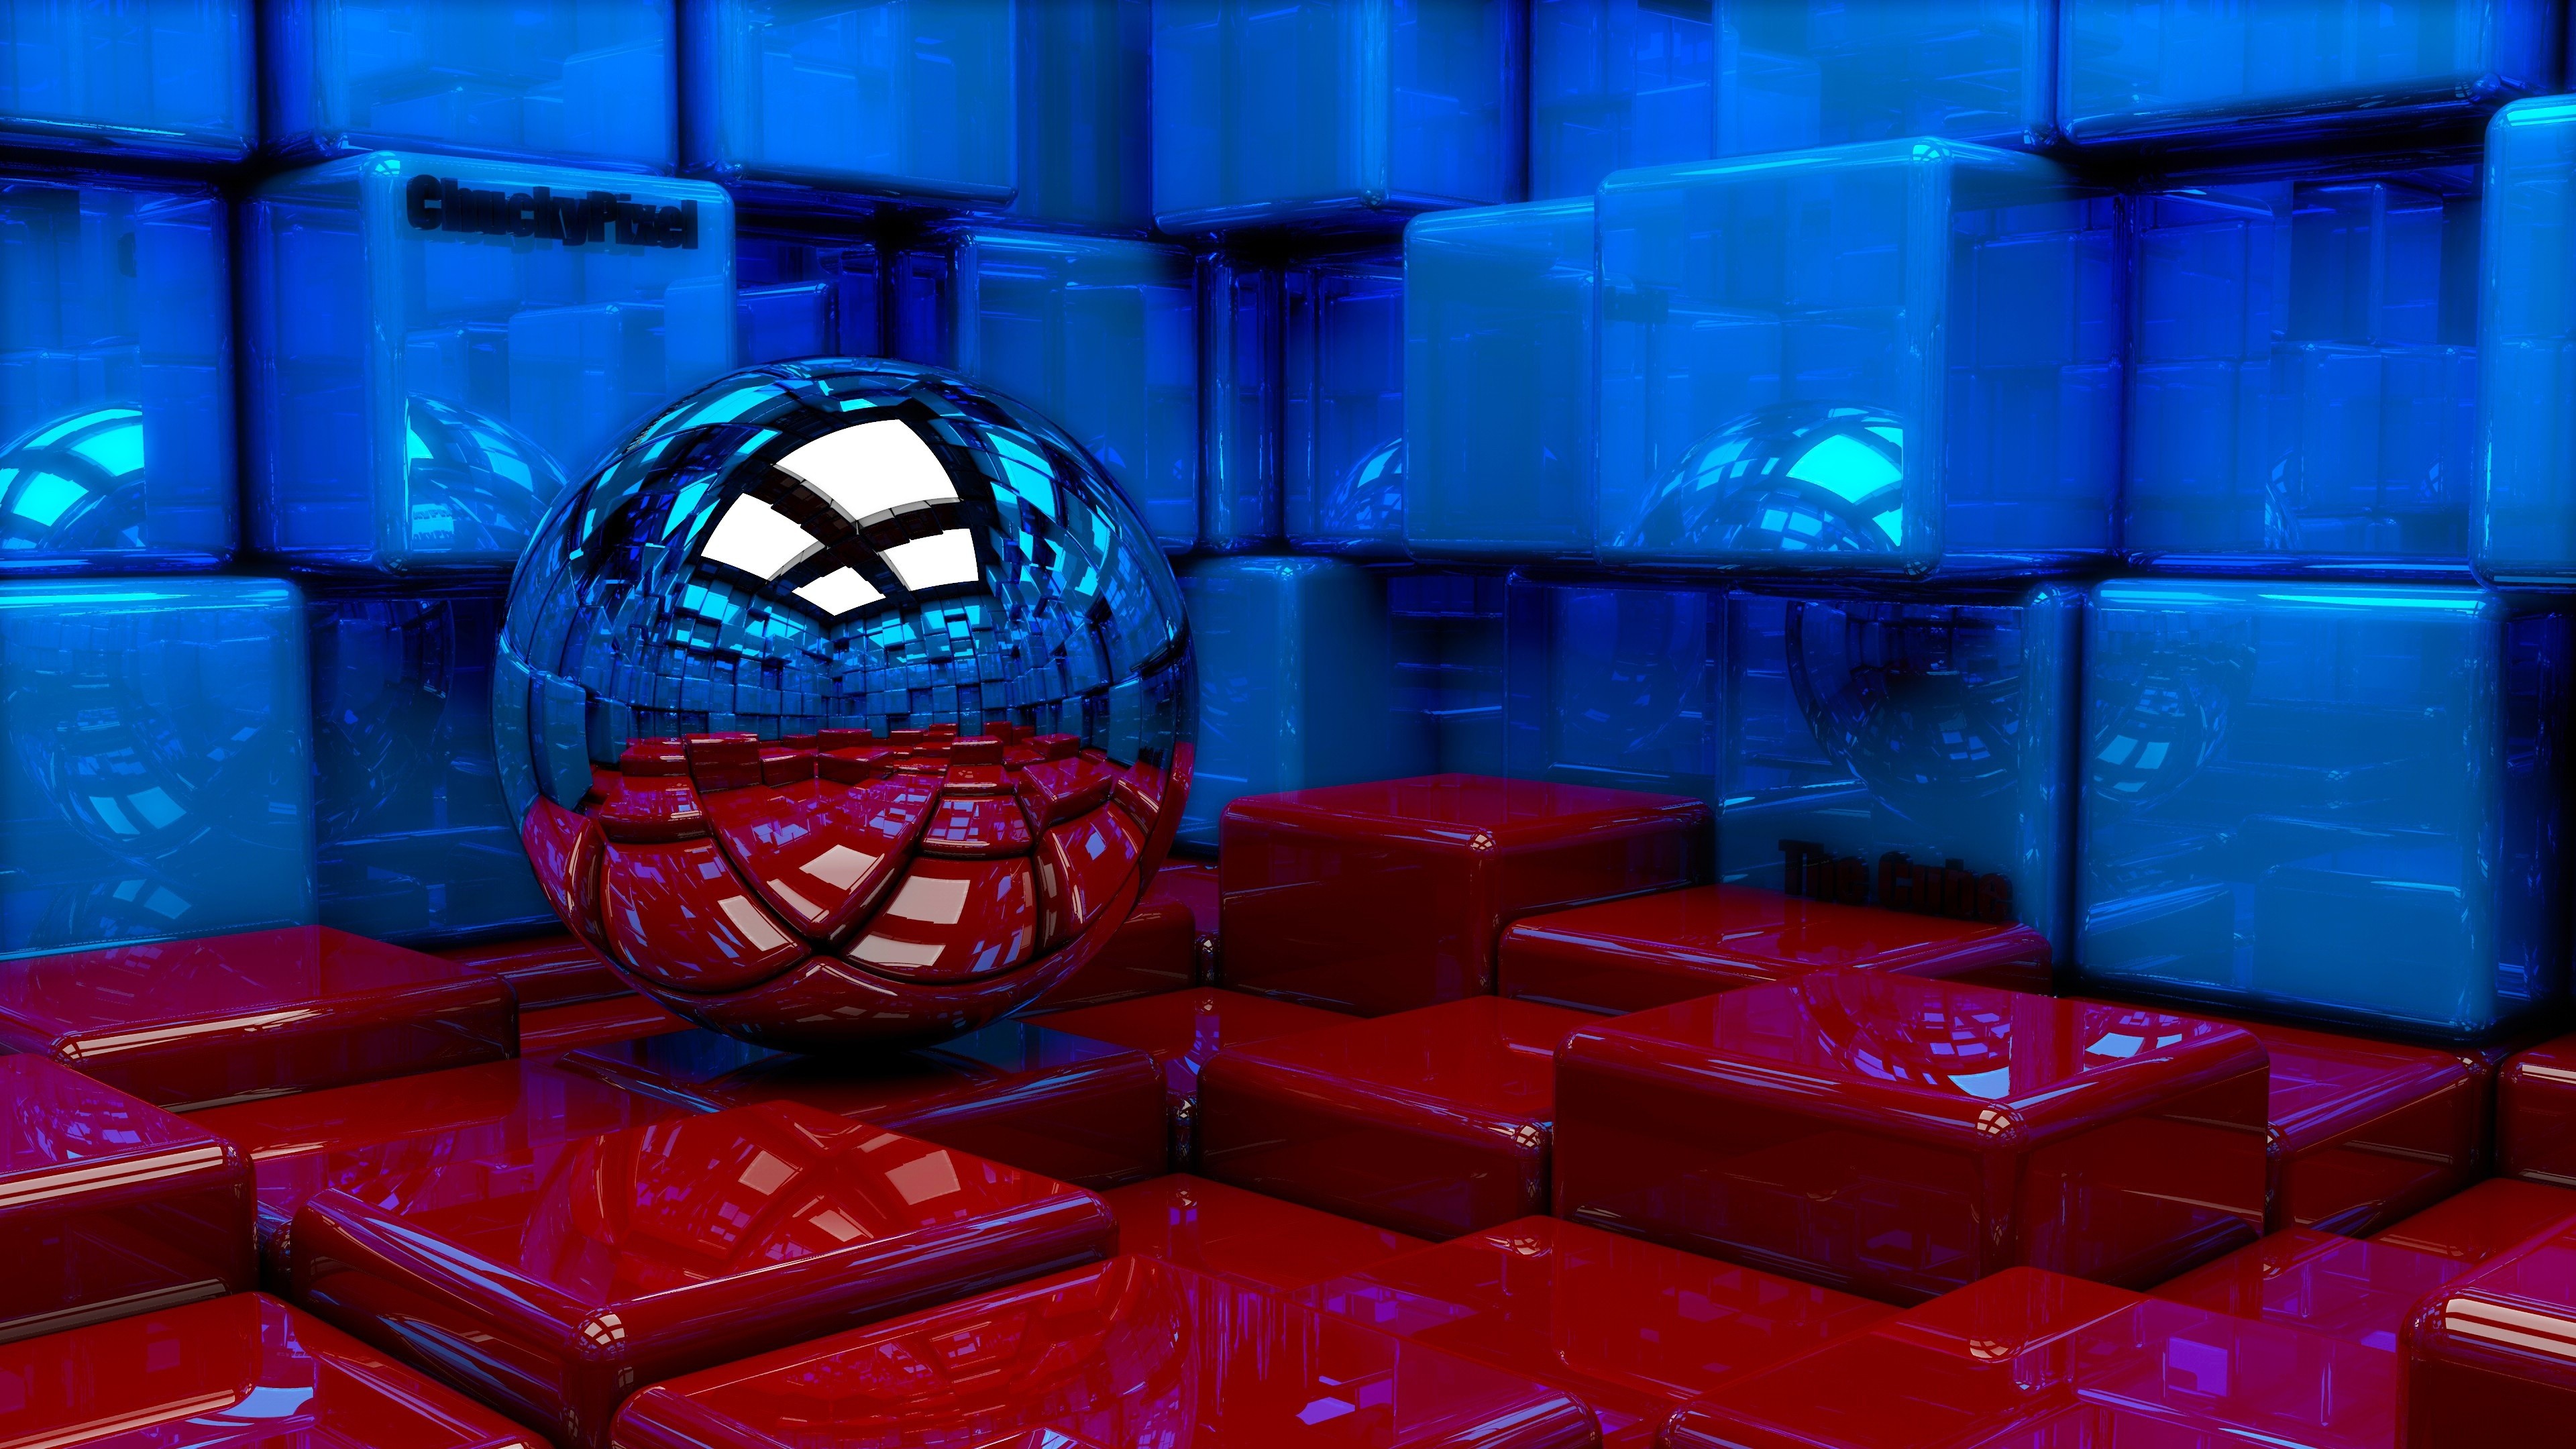 3840x2160 Preview wallpaper ball, cubes, metal, blue, red, reflection 